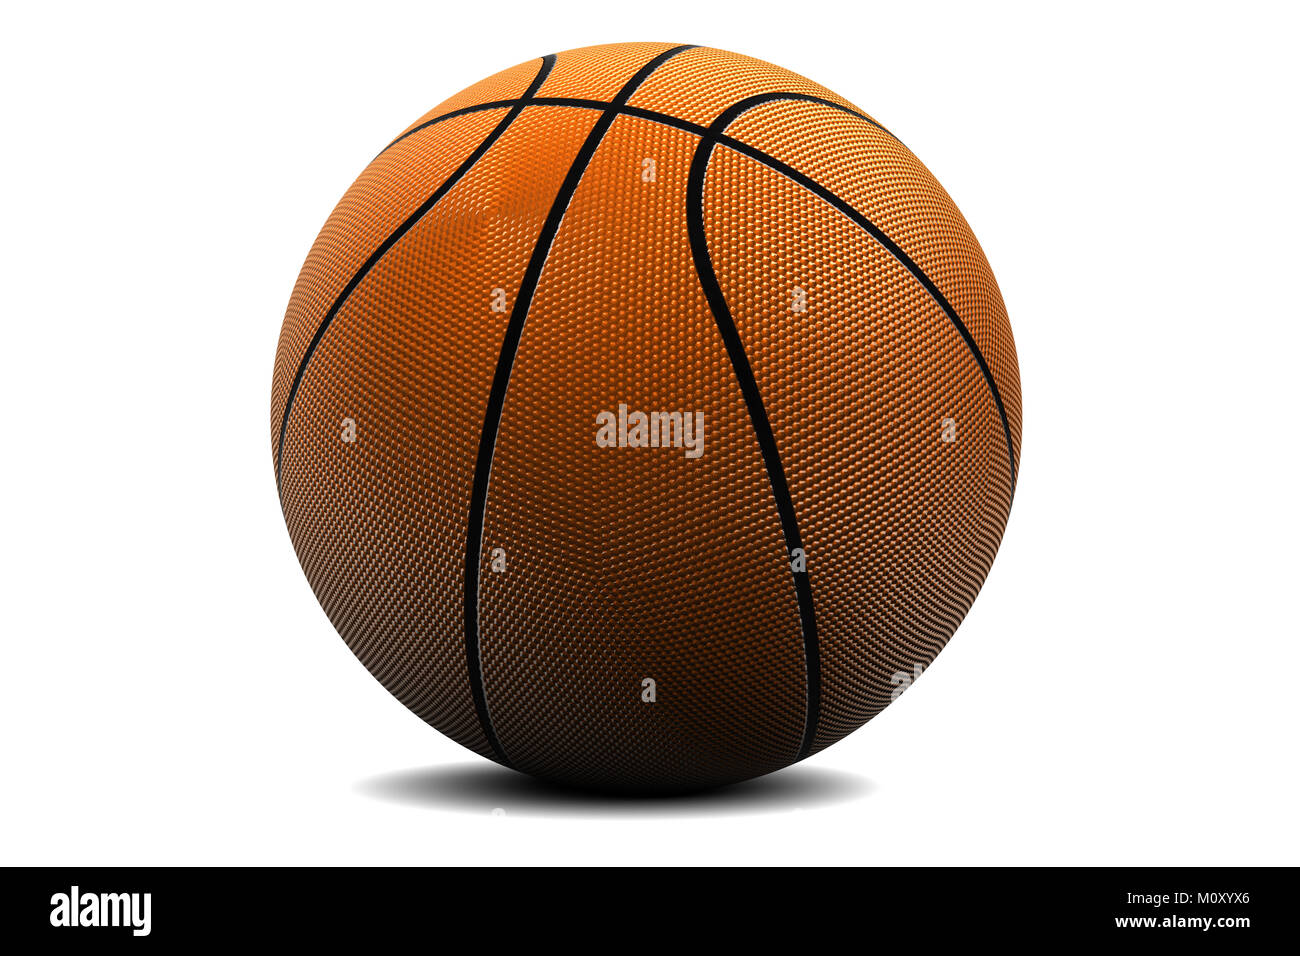 Typical orange basketball with black lines and rough texture. Isolated on white background Stock Photo